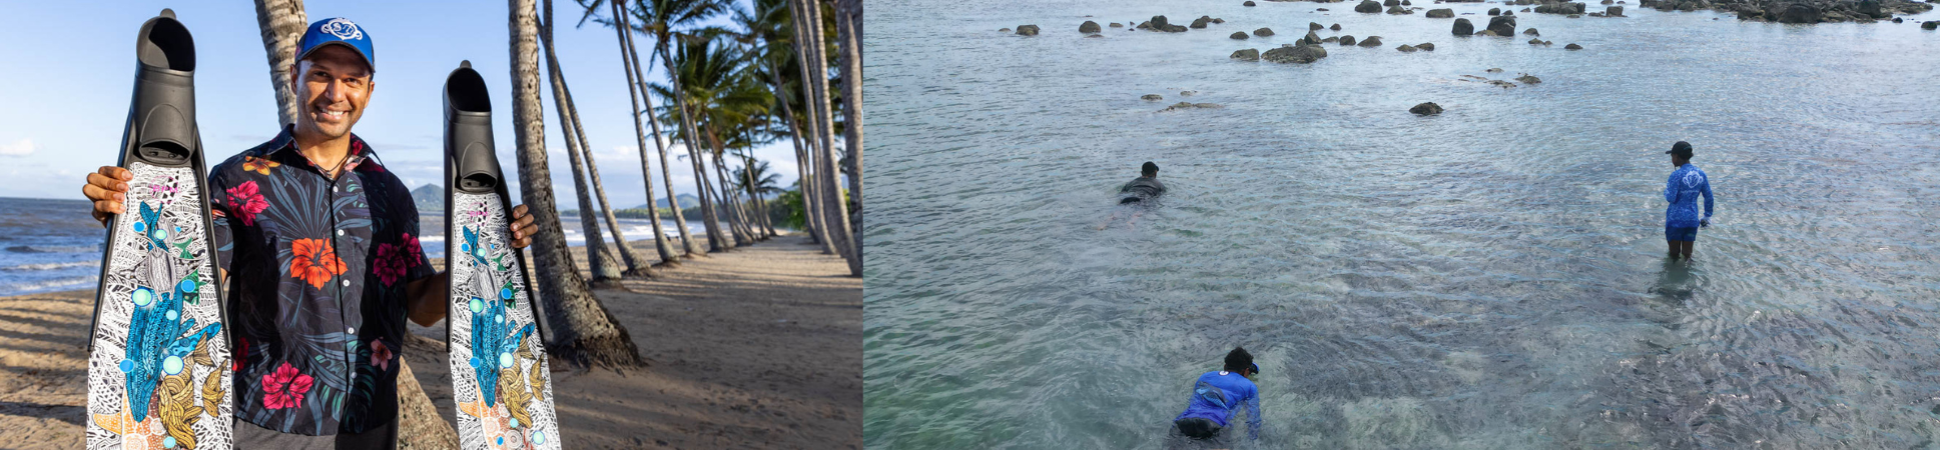 two images together, the left shows a person holding swimming fins, the right shows people in a body of water.